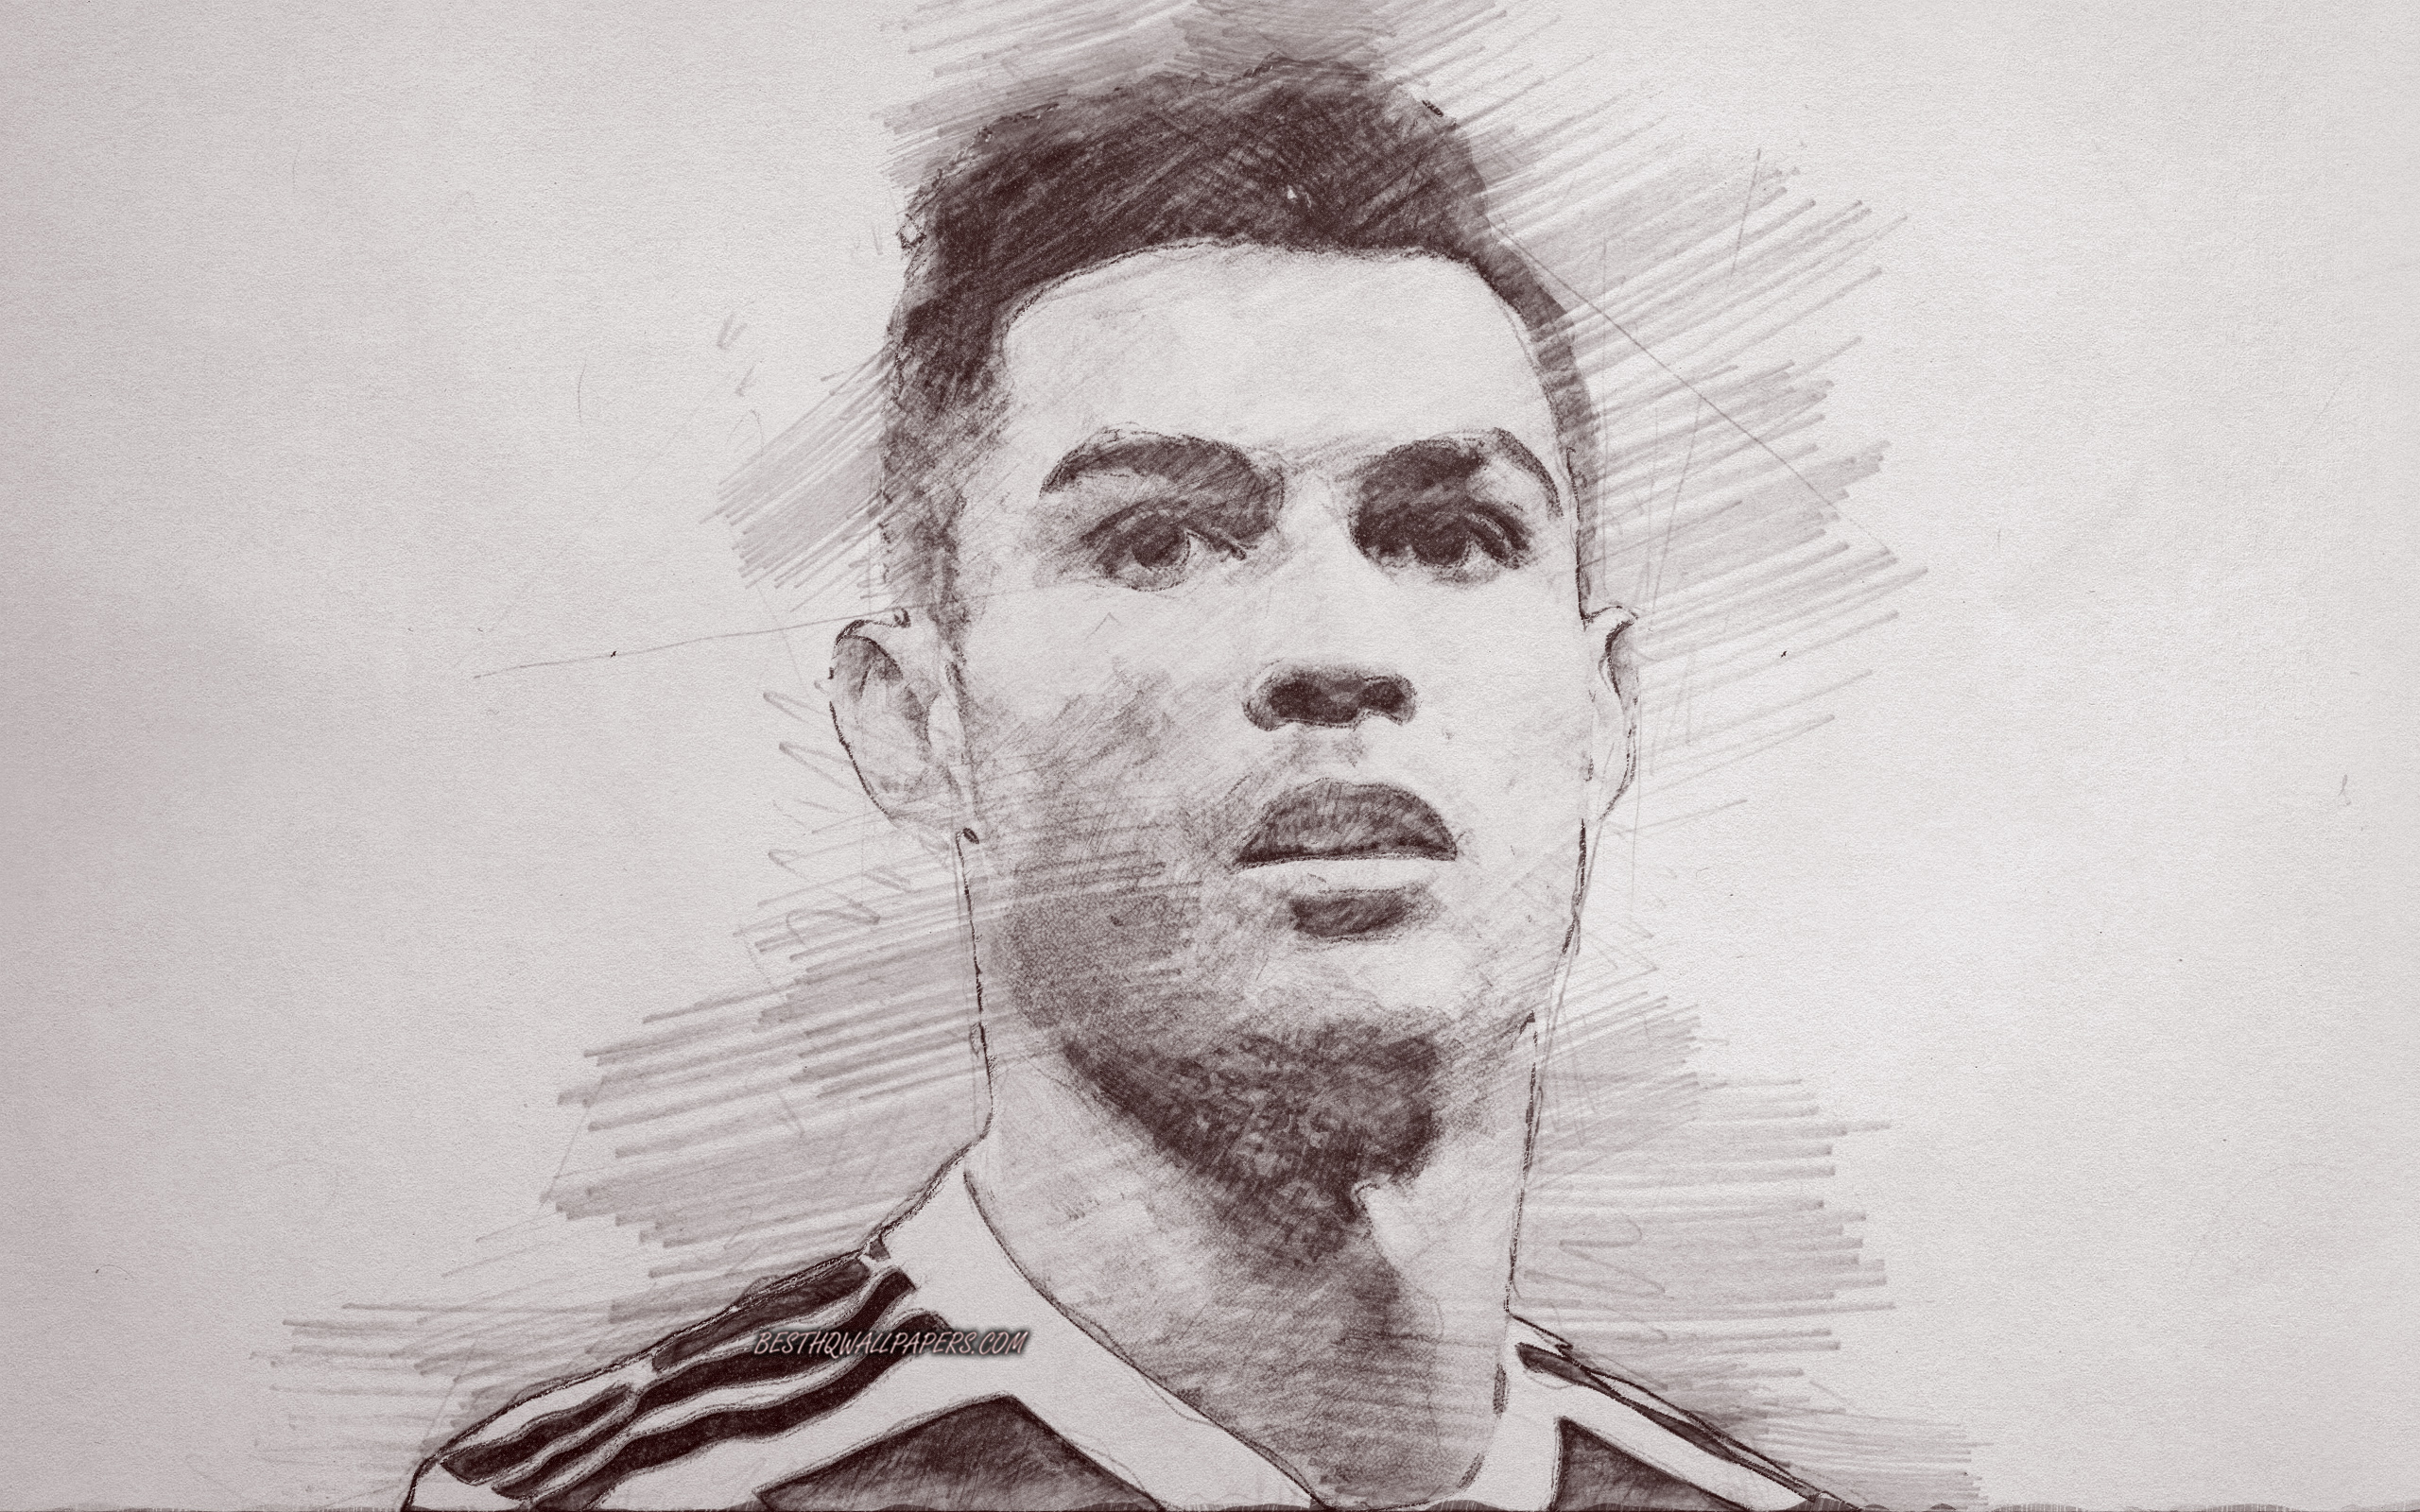 Download wallpaper Cristiano Ronaldo, CR portrait, pencil drawing, painted portrait, Portuguese football player, Juventus FC, football star, football for desktop with resolution 2560x1600. High Quality HD picture wallpaper